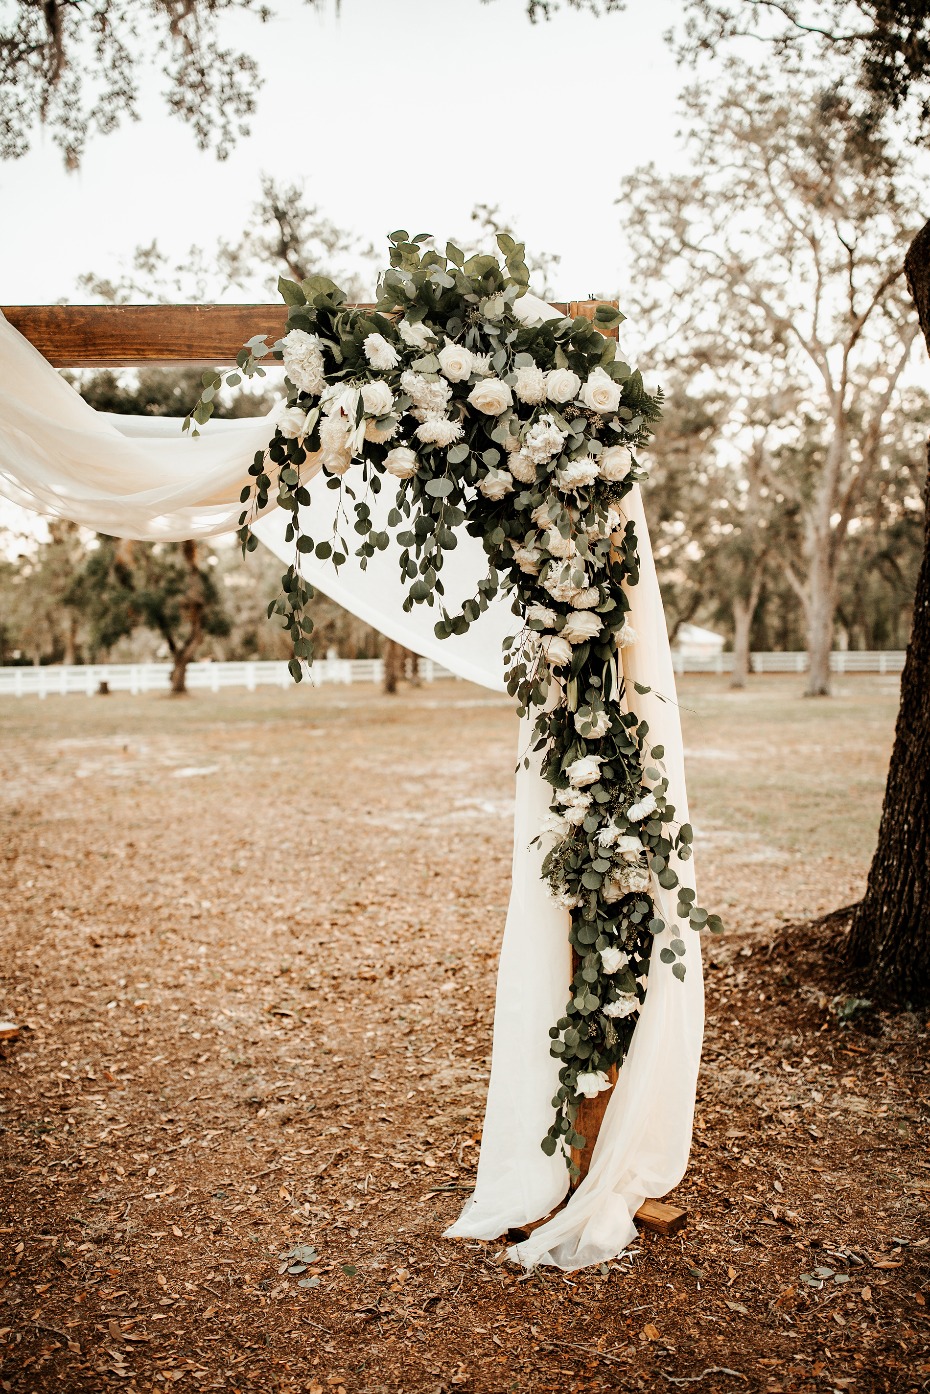 Floral wedding arch with draped fabric